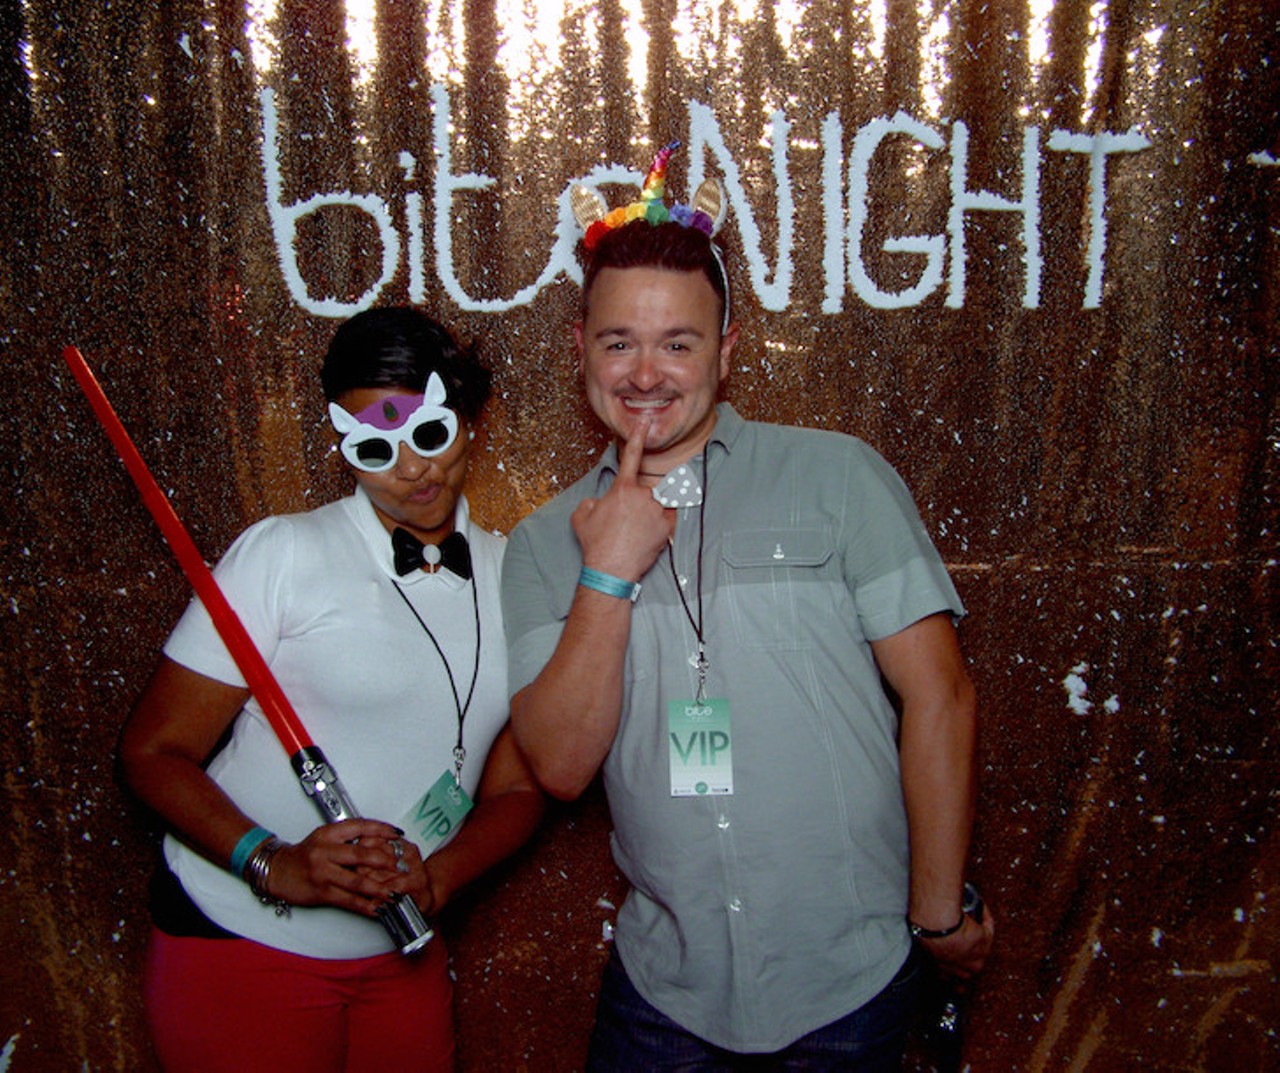 All the Orlandoans who were snapped at the Bite Night&nbsp;Omelet Bar photo booth!